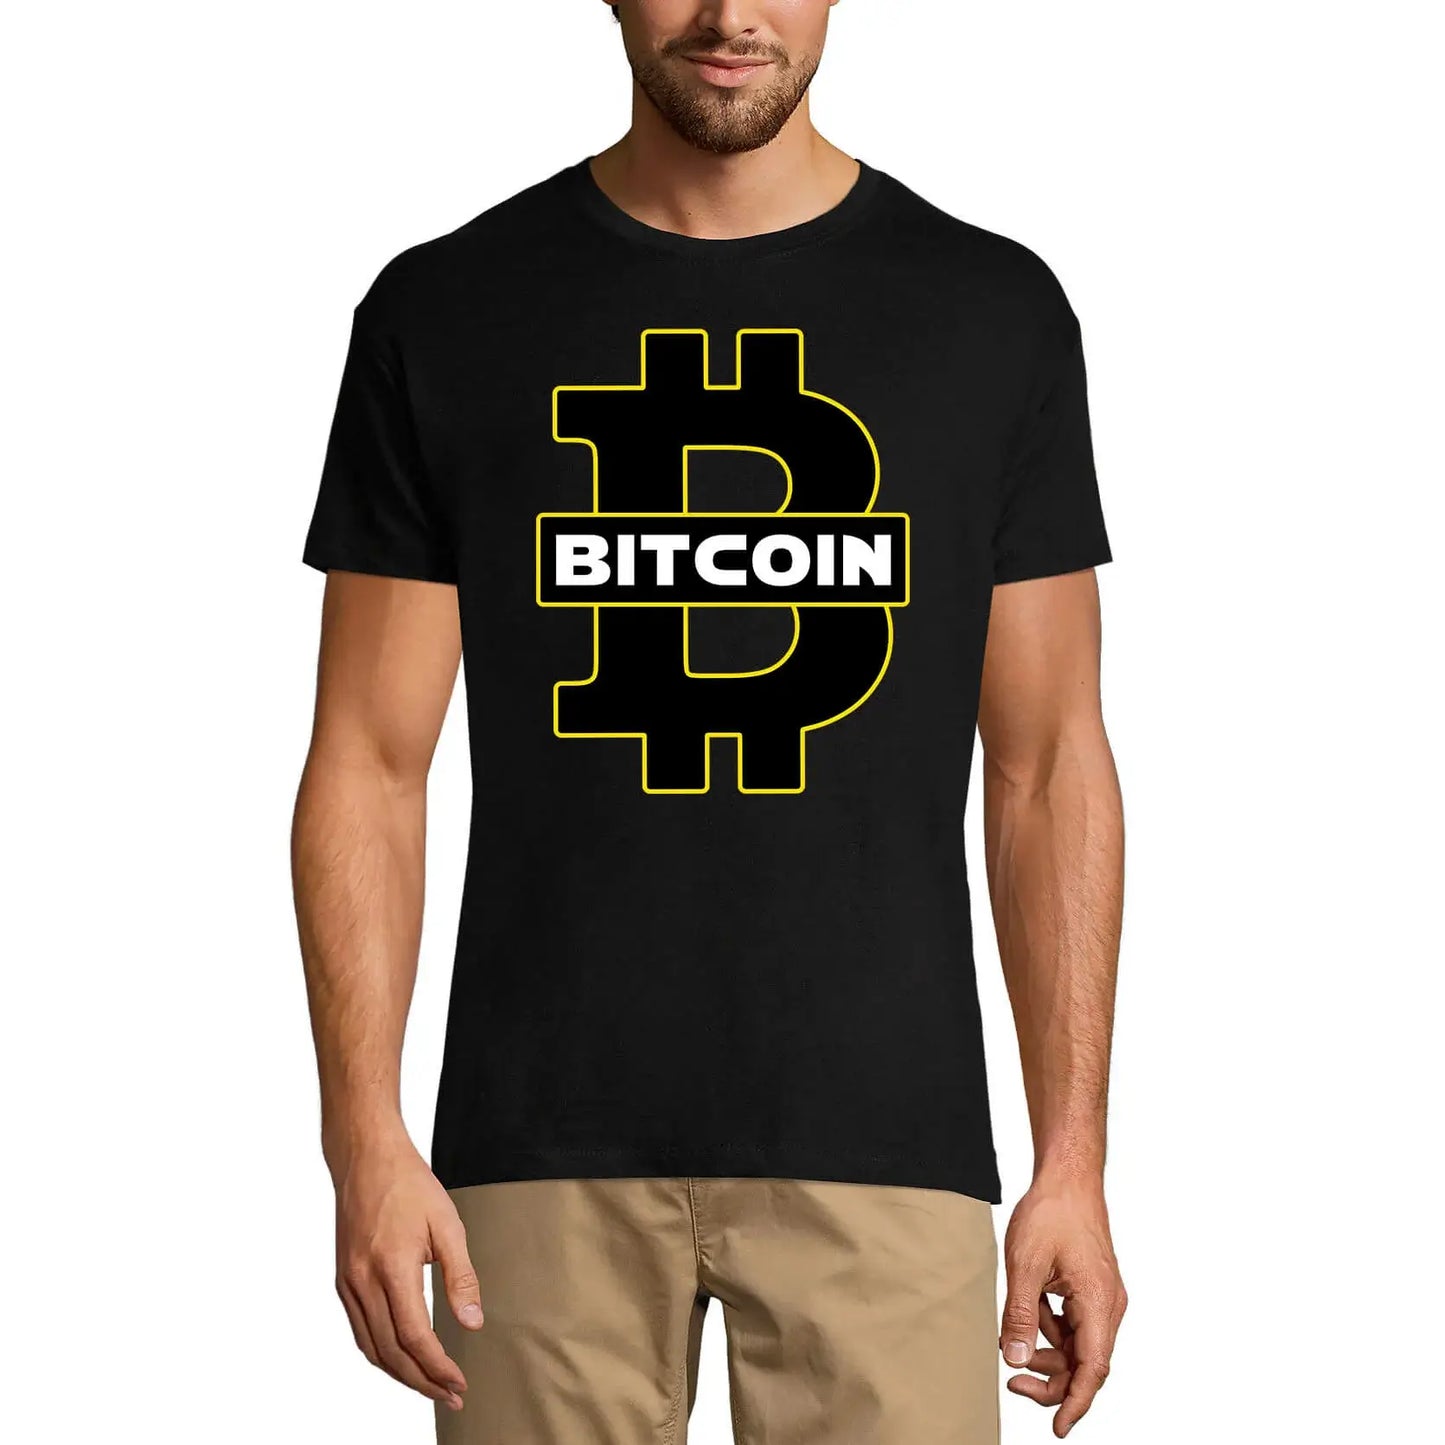 Men's Graphic T-Shirt Bitcoin Cryptocurrency - One Coin - Blockchain Eco-Friendly Limited Edition Short Sleeve Tee-Shirt Vintage Birthday Gift Novelty